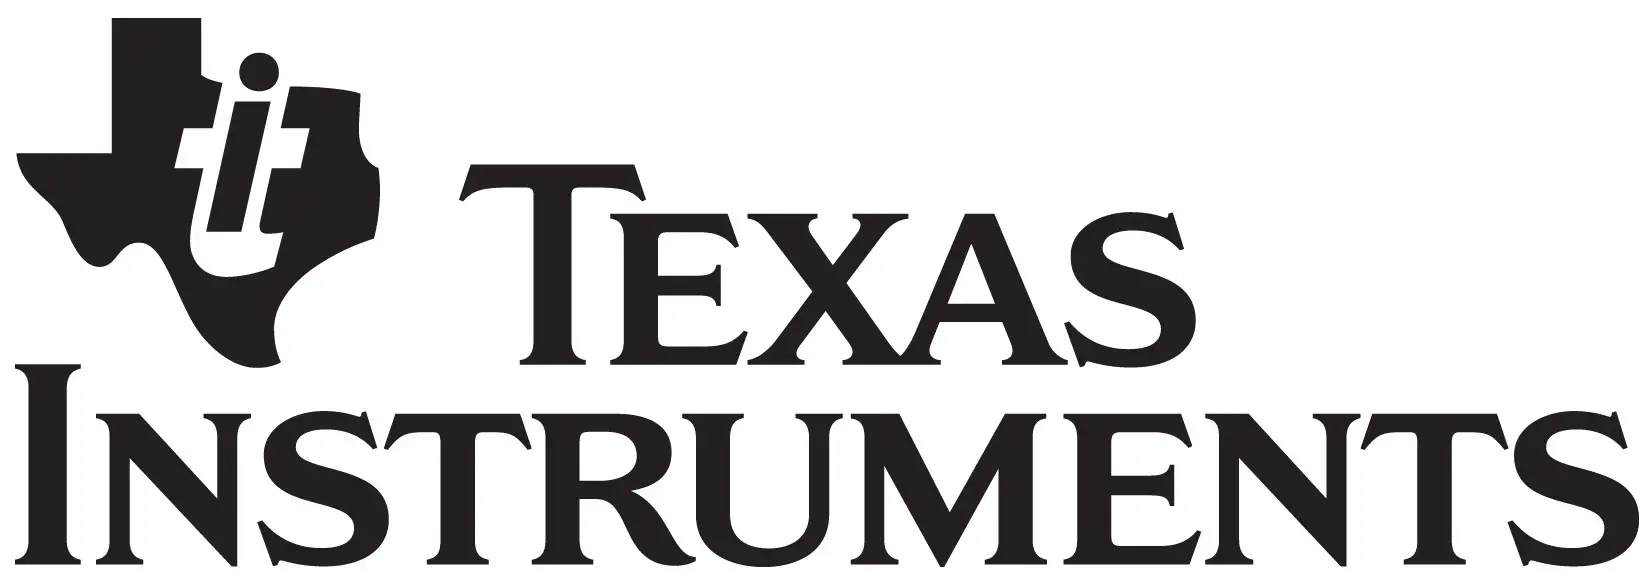 Texas Instrument logo - for some reason we don't have an alt tag here